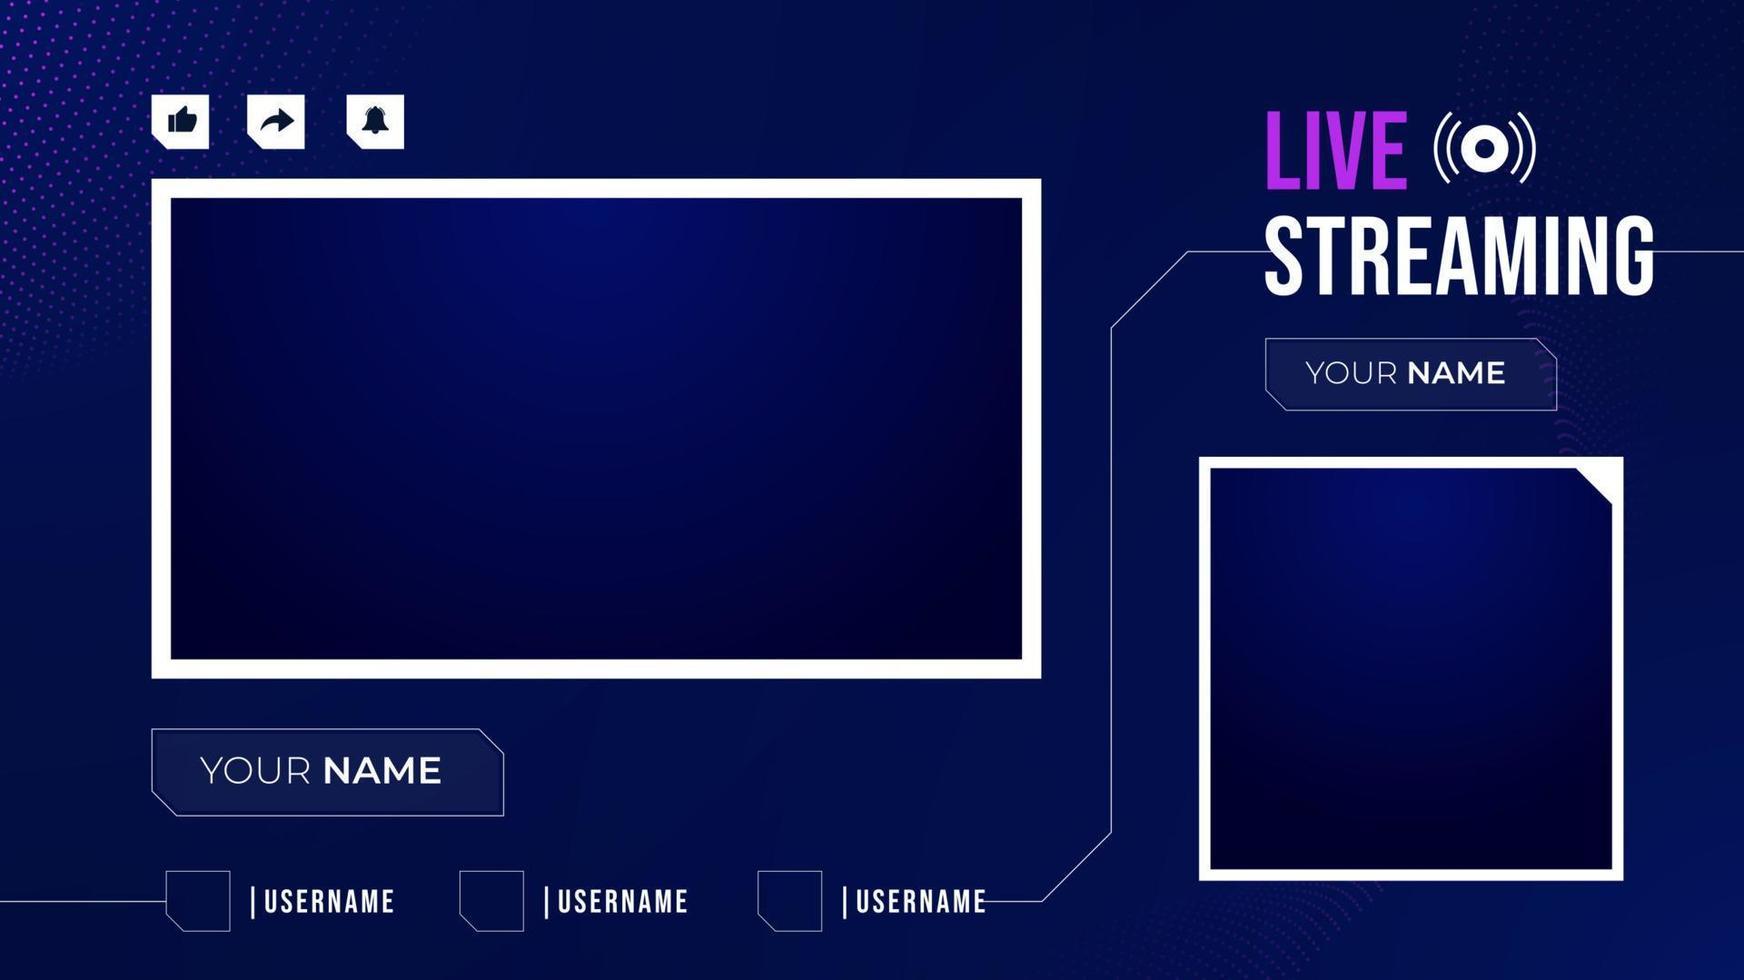 Streaming Site designs, themes, templates and downloadable graphic